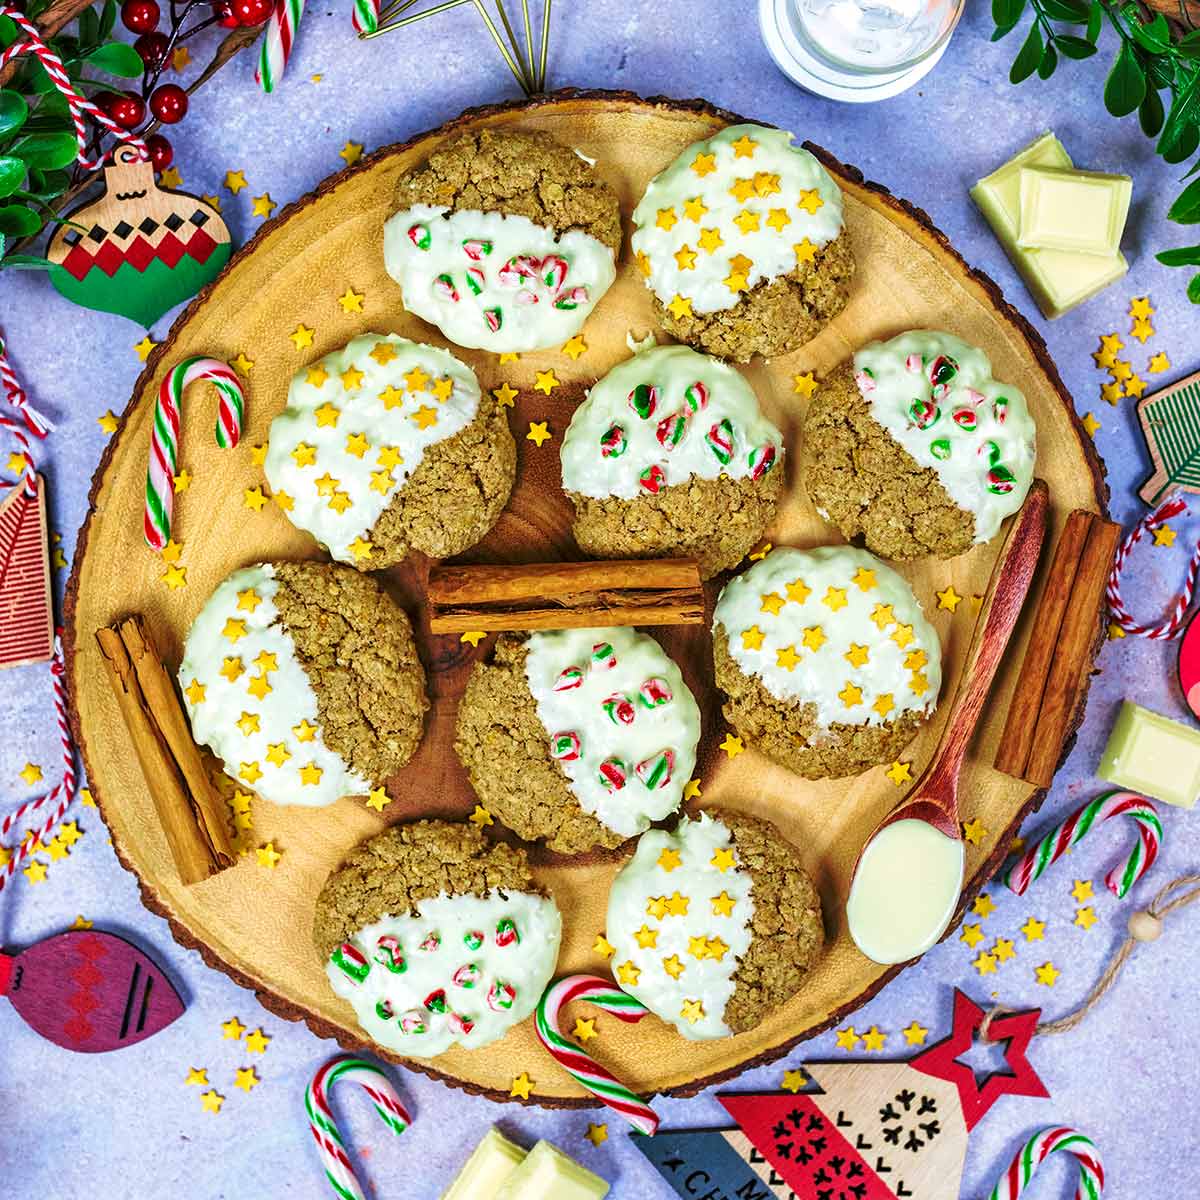 https://hungryhealthyhappy.com/wp-content/uploads/2020/11/Healthy-Christmas-Cookies-featured-c.jpg